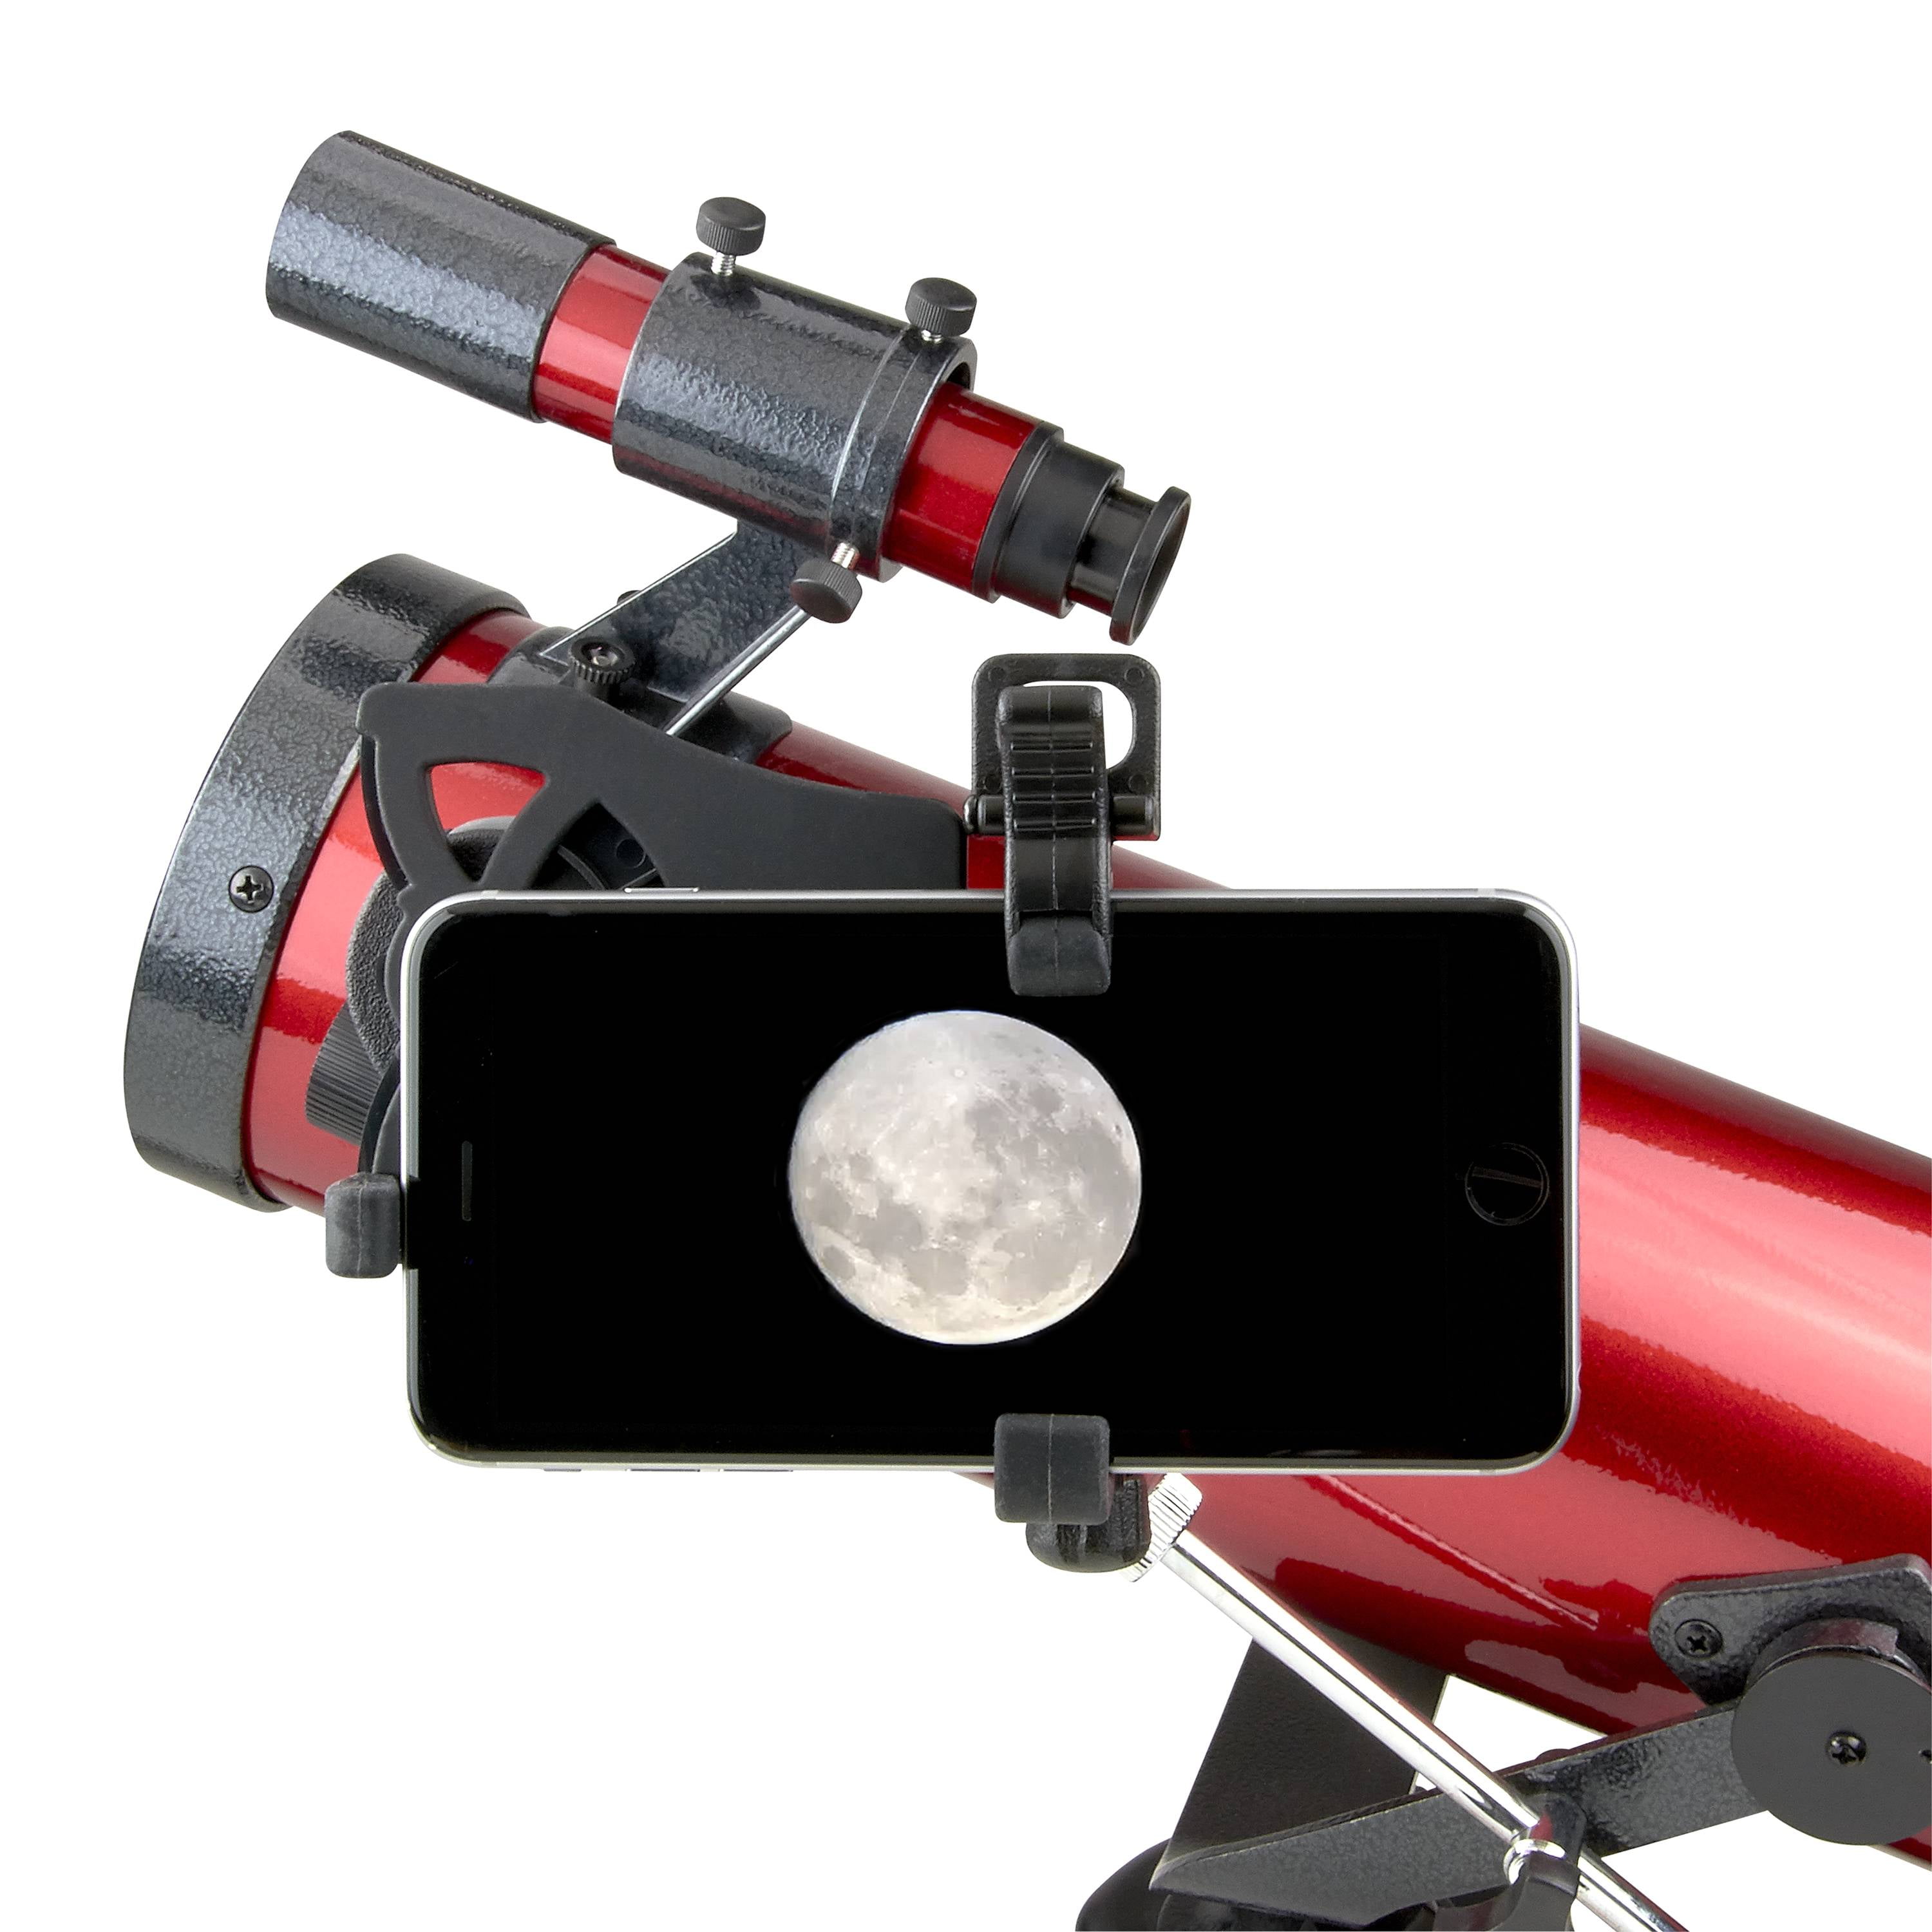 RP-400SP Carson Red Planet 50-100x90mm Refractor Telescope with Universal Smartphone Digiscoping Adapter for Astronomy 